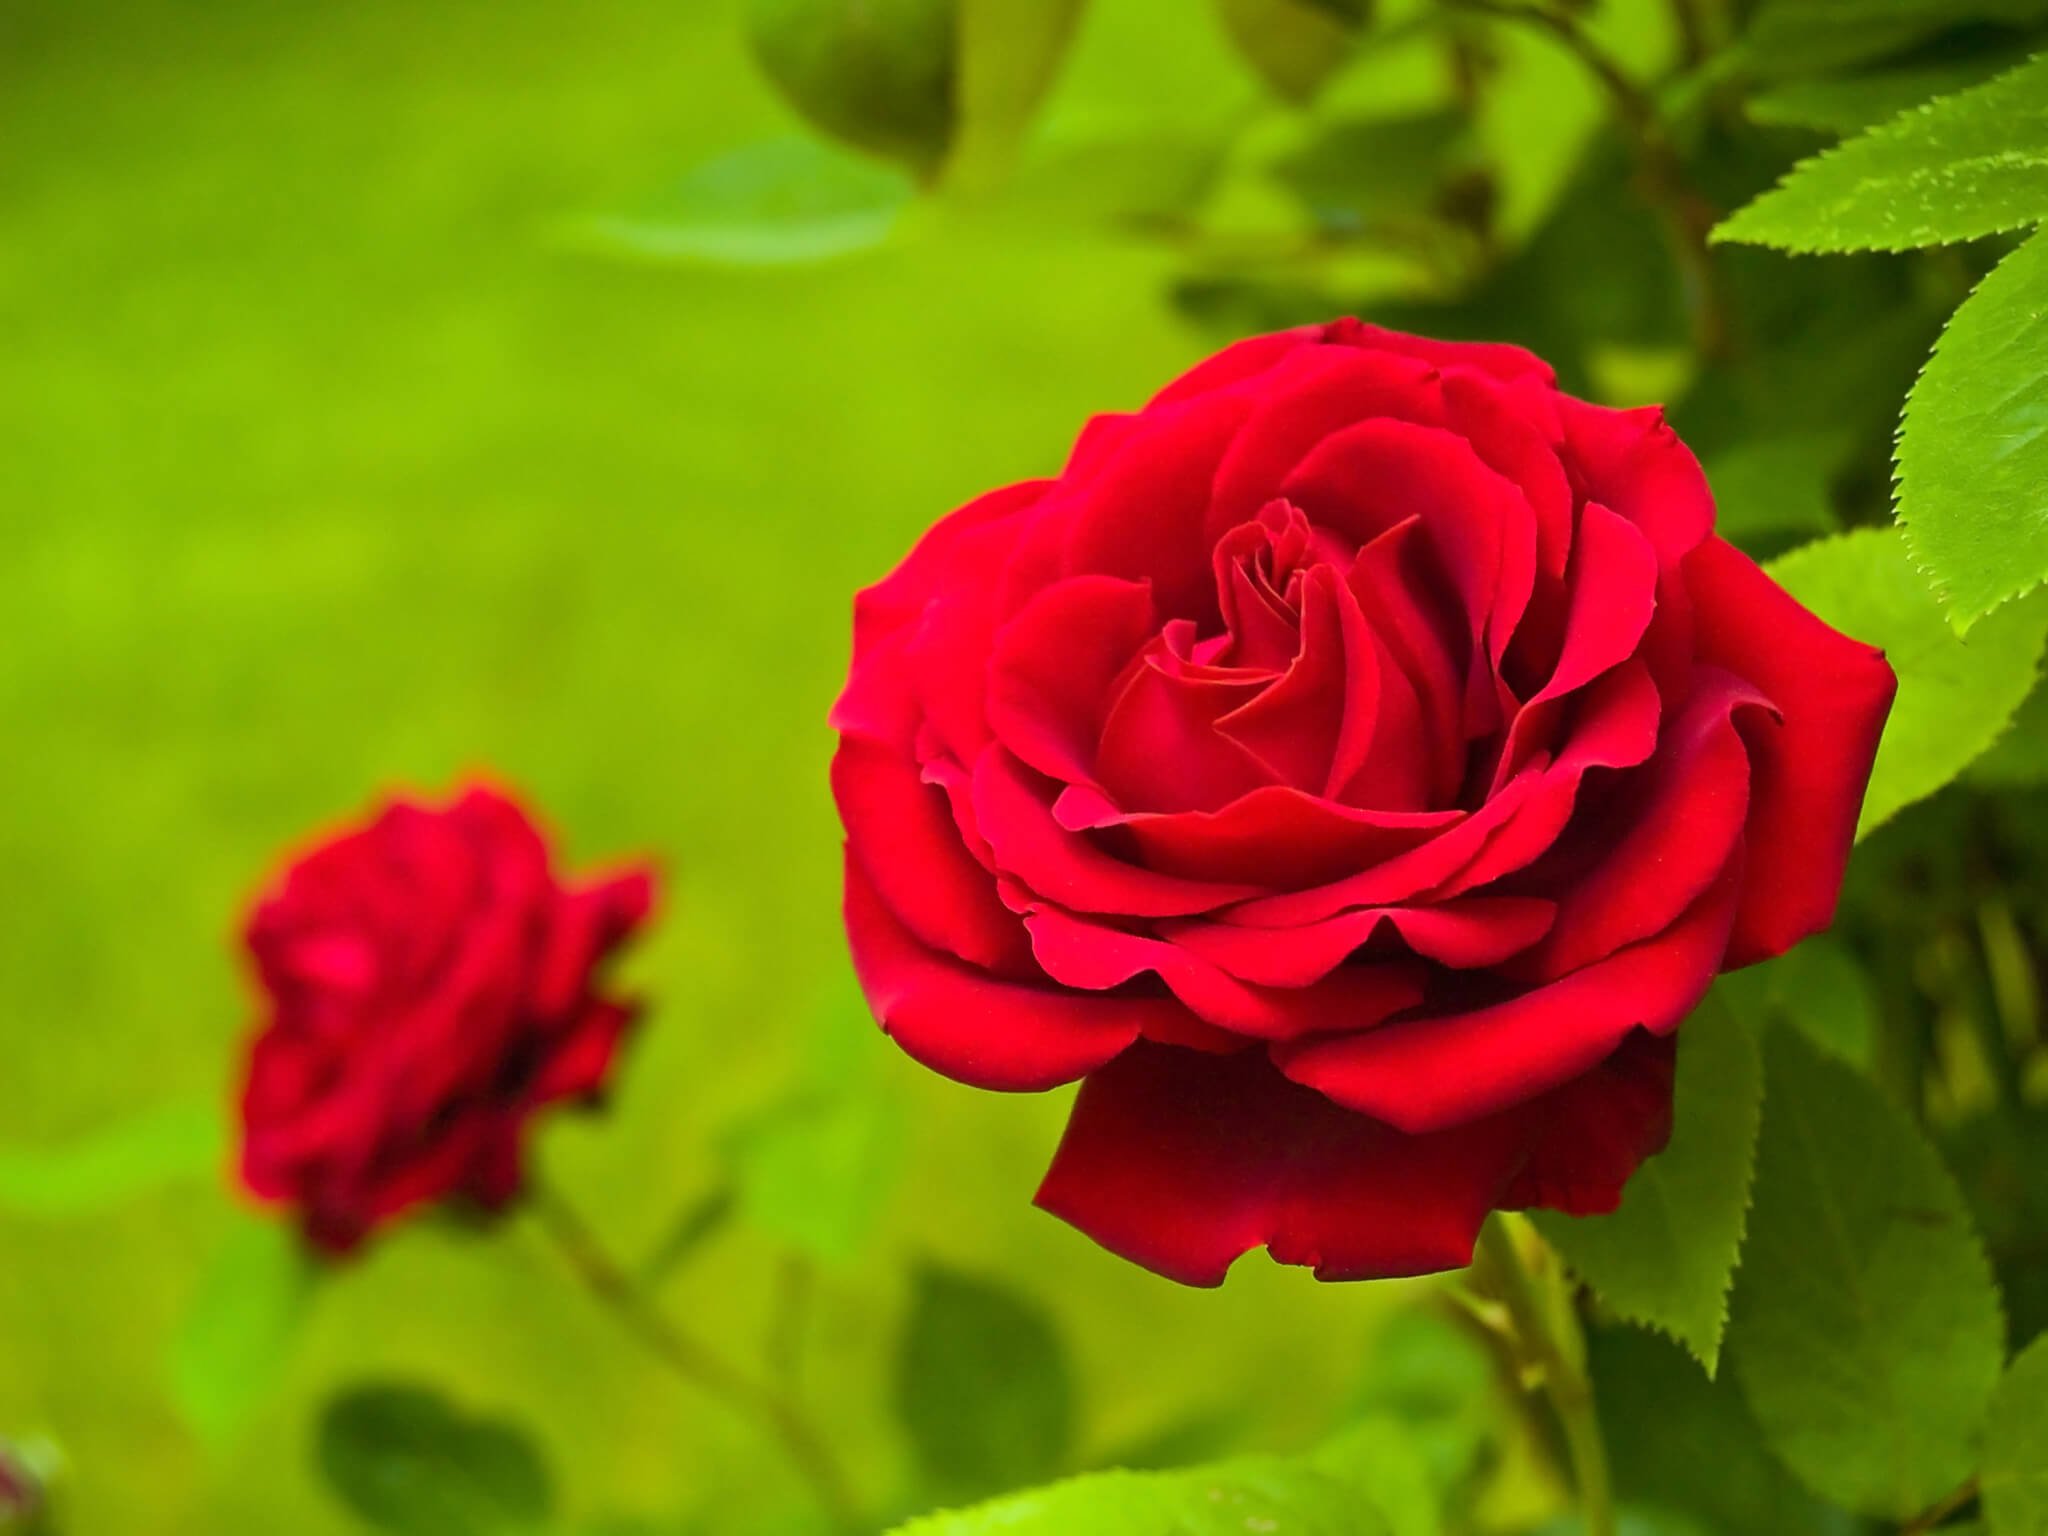 National Red Rose Day (June 12th)